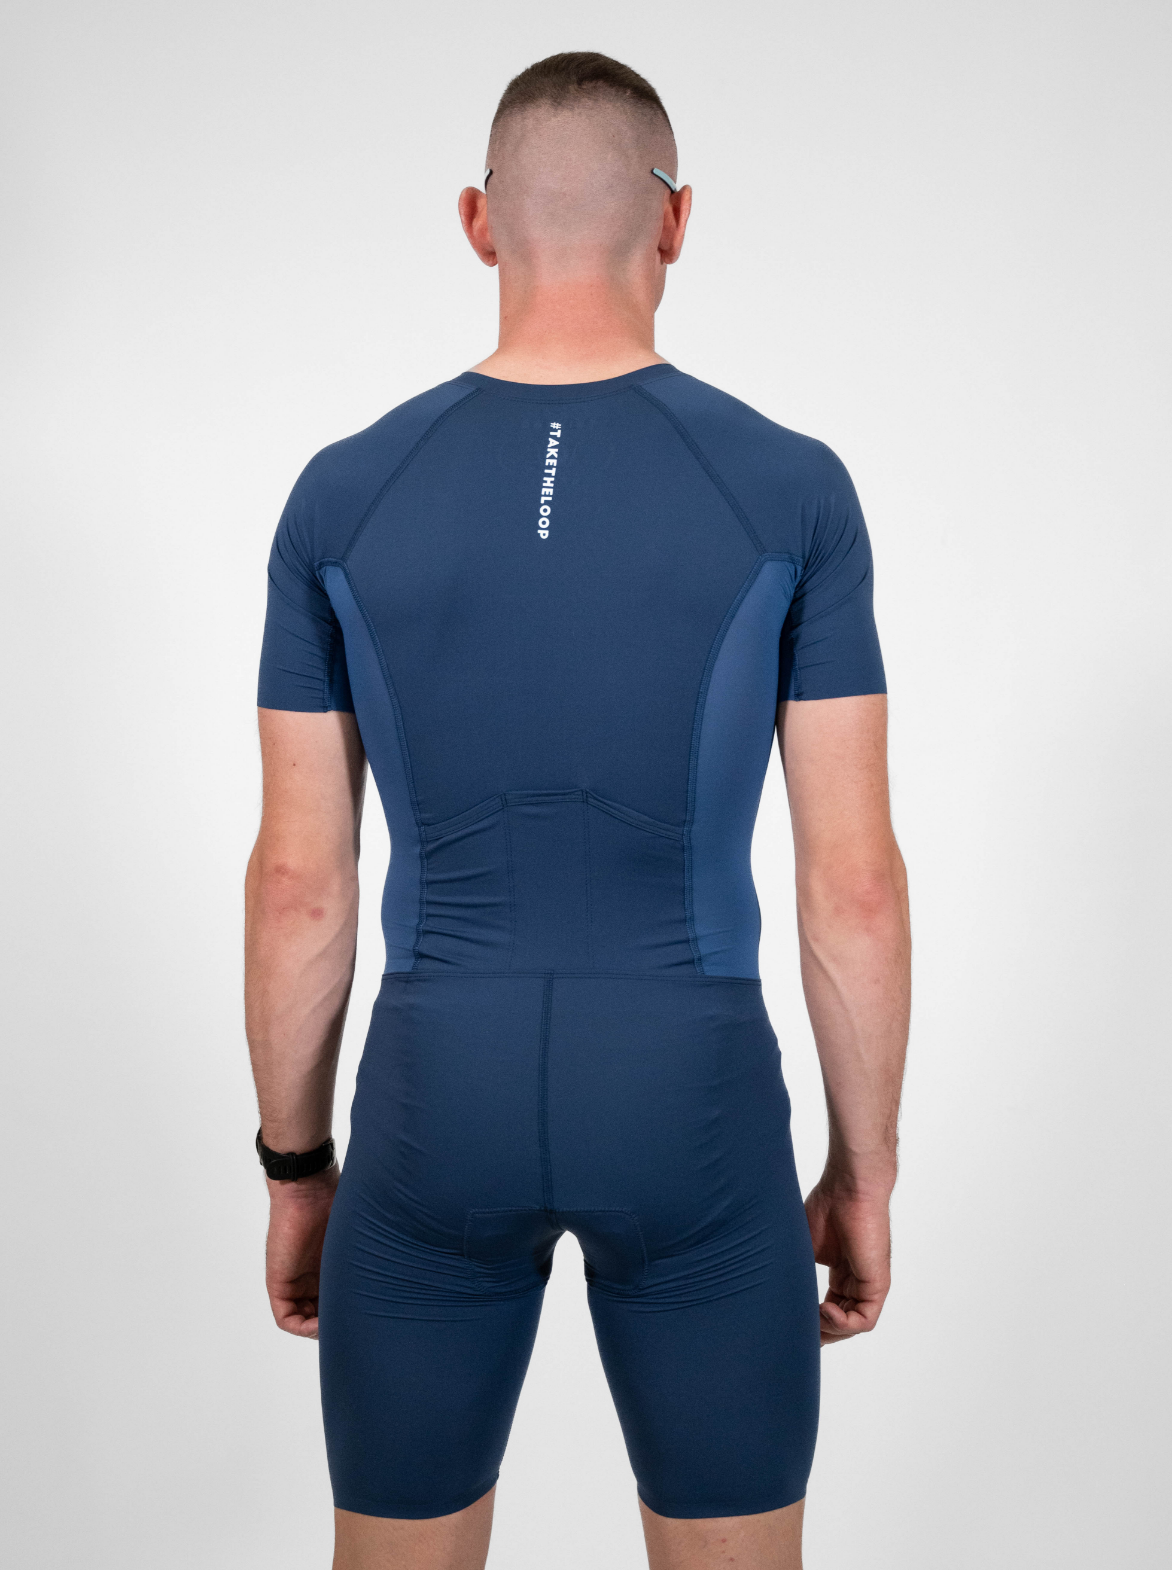 Trisuit recycled and Made in France — TOULON